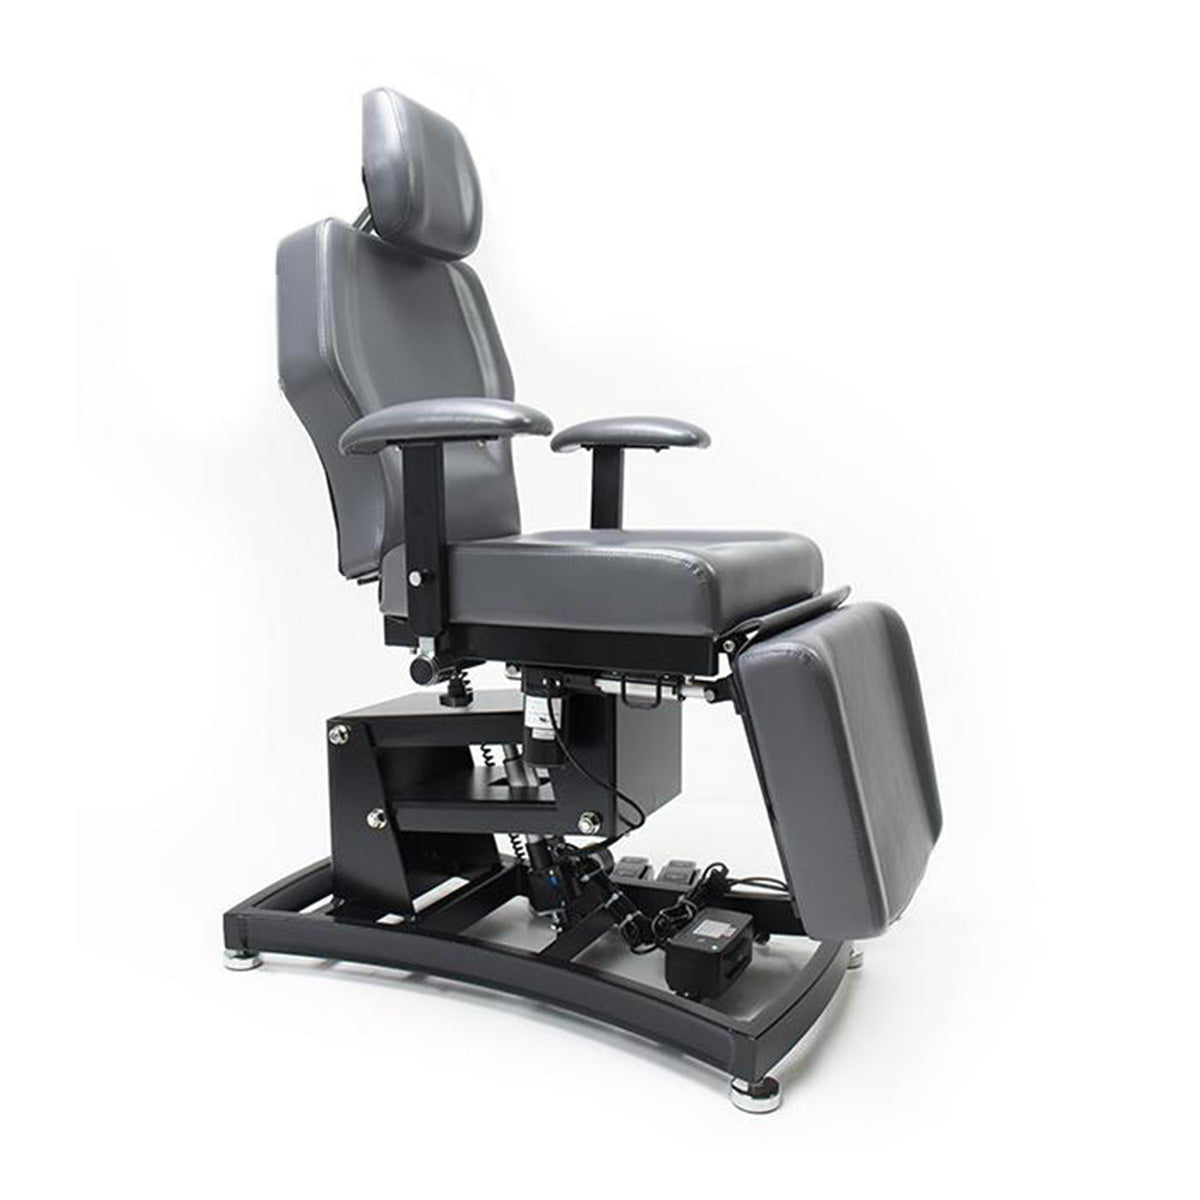 InkBed Hydraulic Adjustable Tattoo Client Chair and Table